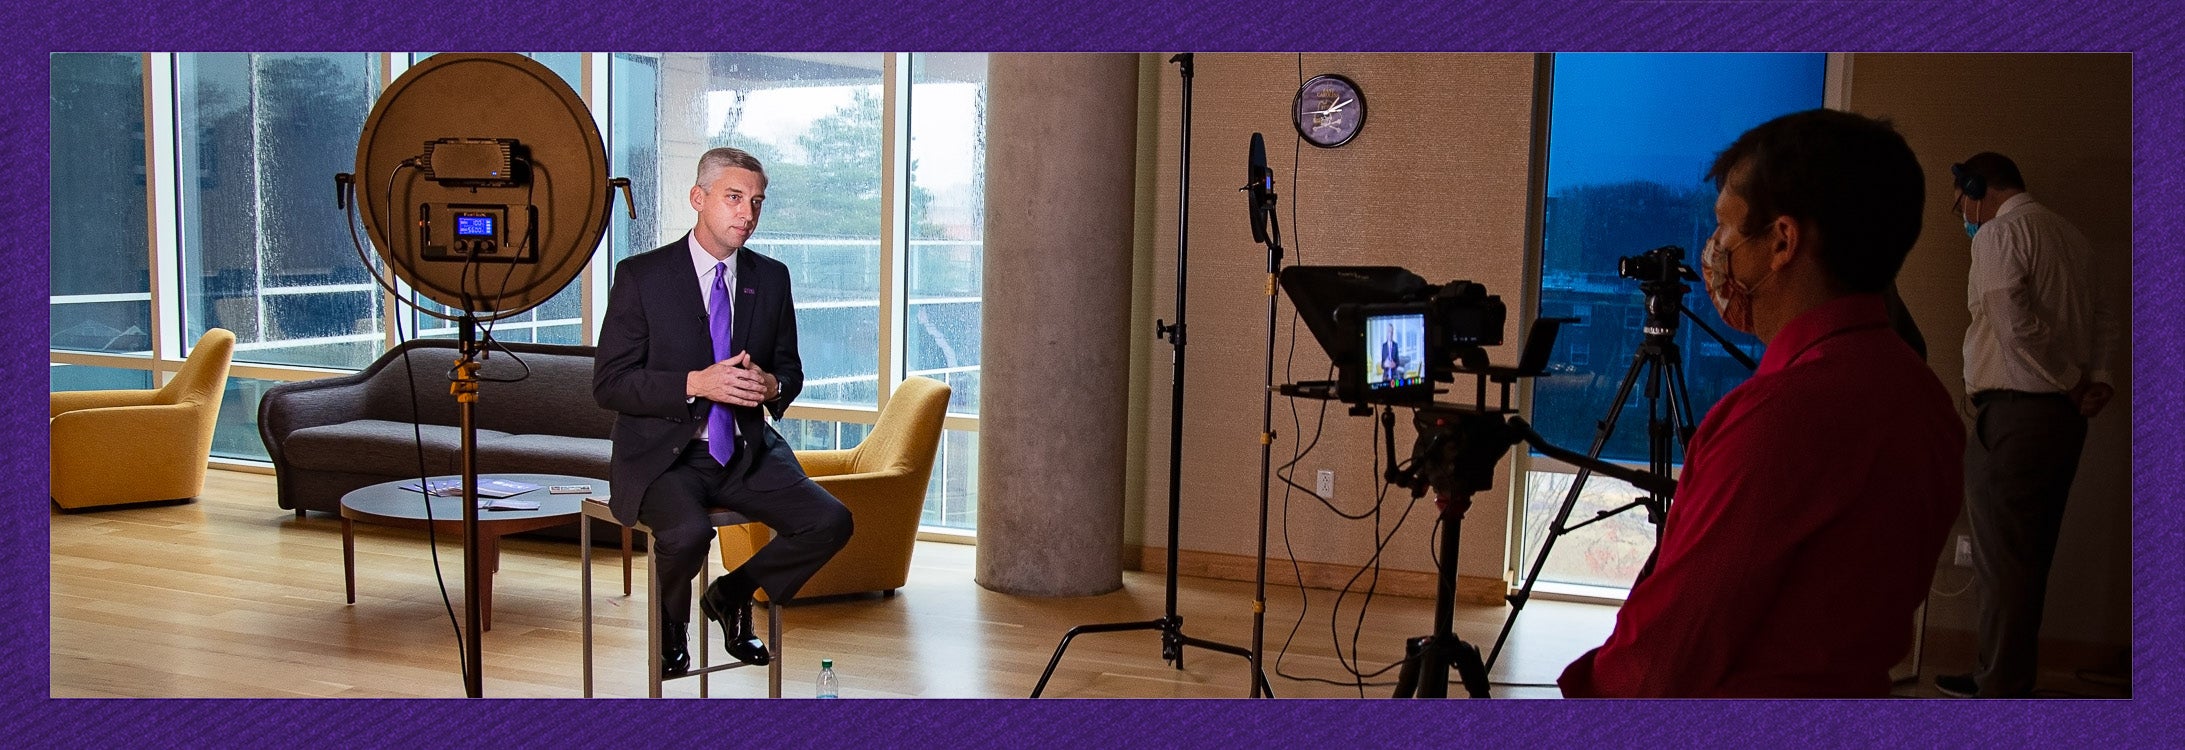 East Carolina University Chancellor-Elect Dr. Philip Rogers films his introductory video to Pirate Nation in the Trustees Suite at the Main Campus Student Center on campus. (Photo by Cliff Hollis | Video by ECU Creative Services and Reed Wolfley)